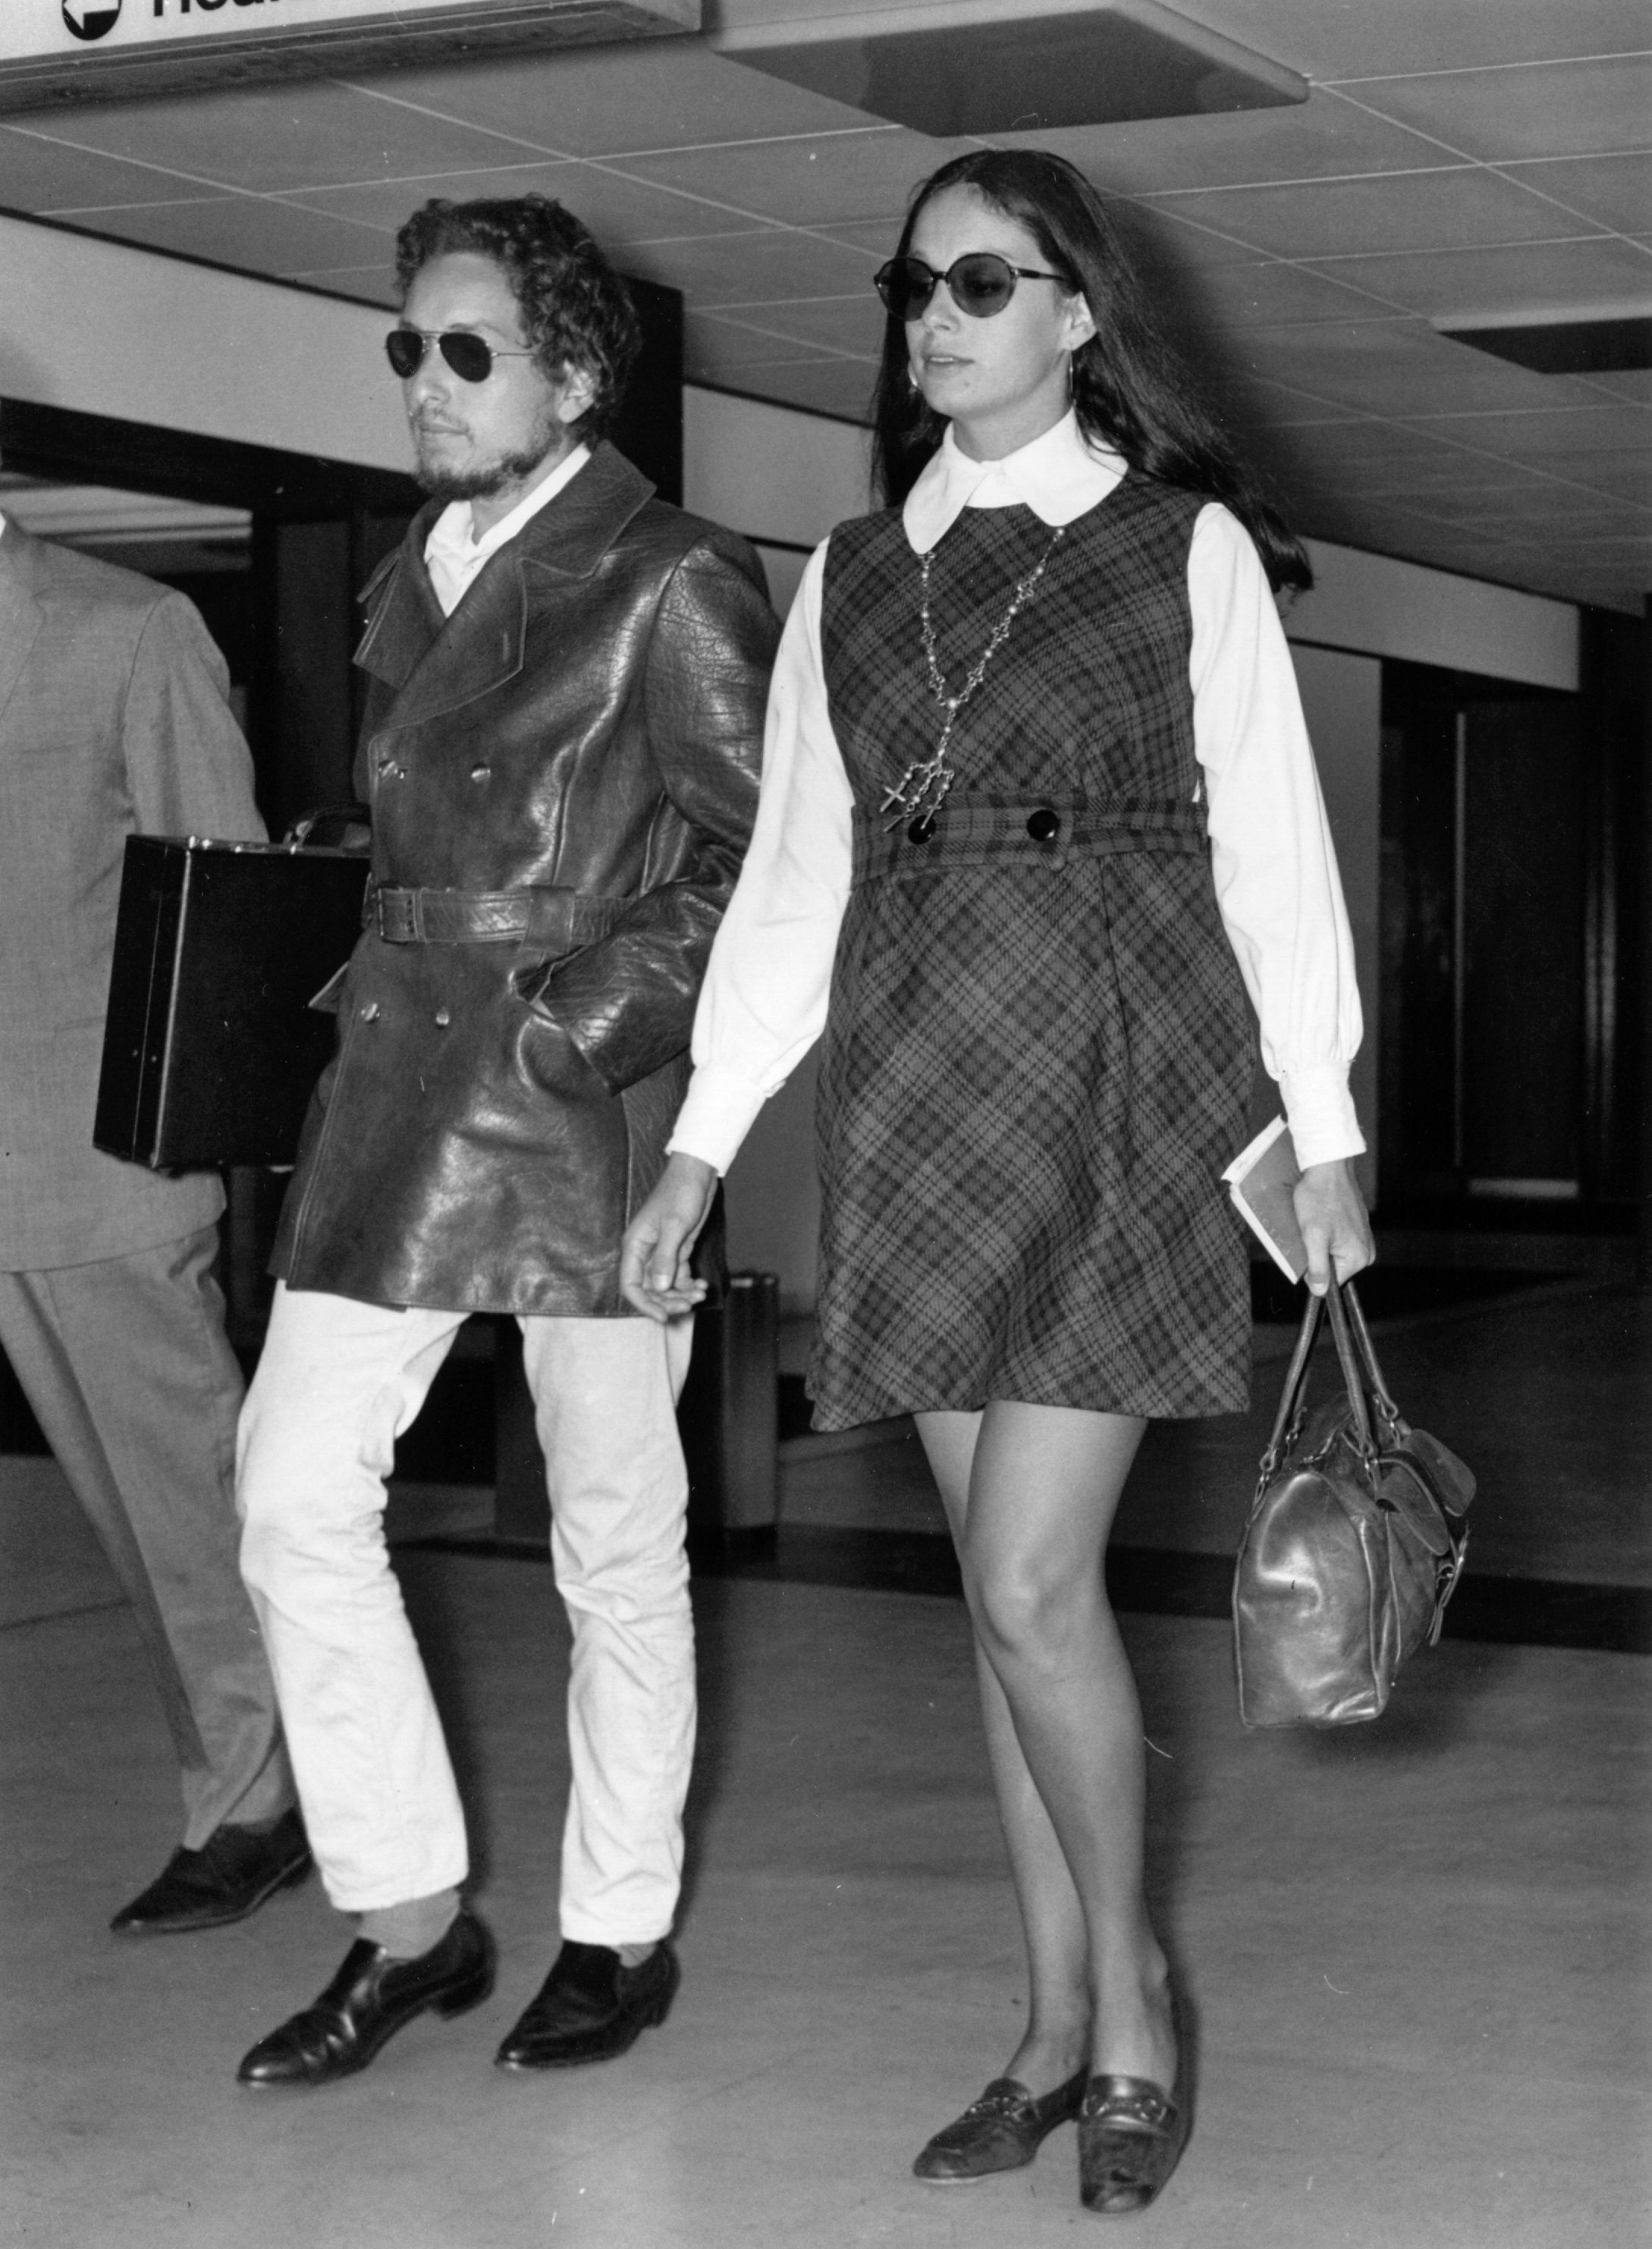 Bob Dylan and Sara arriving Heathrow Airport on September 2, 1969 | Source: Getty Images